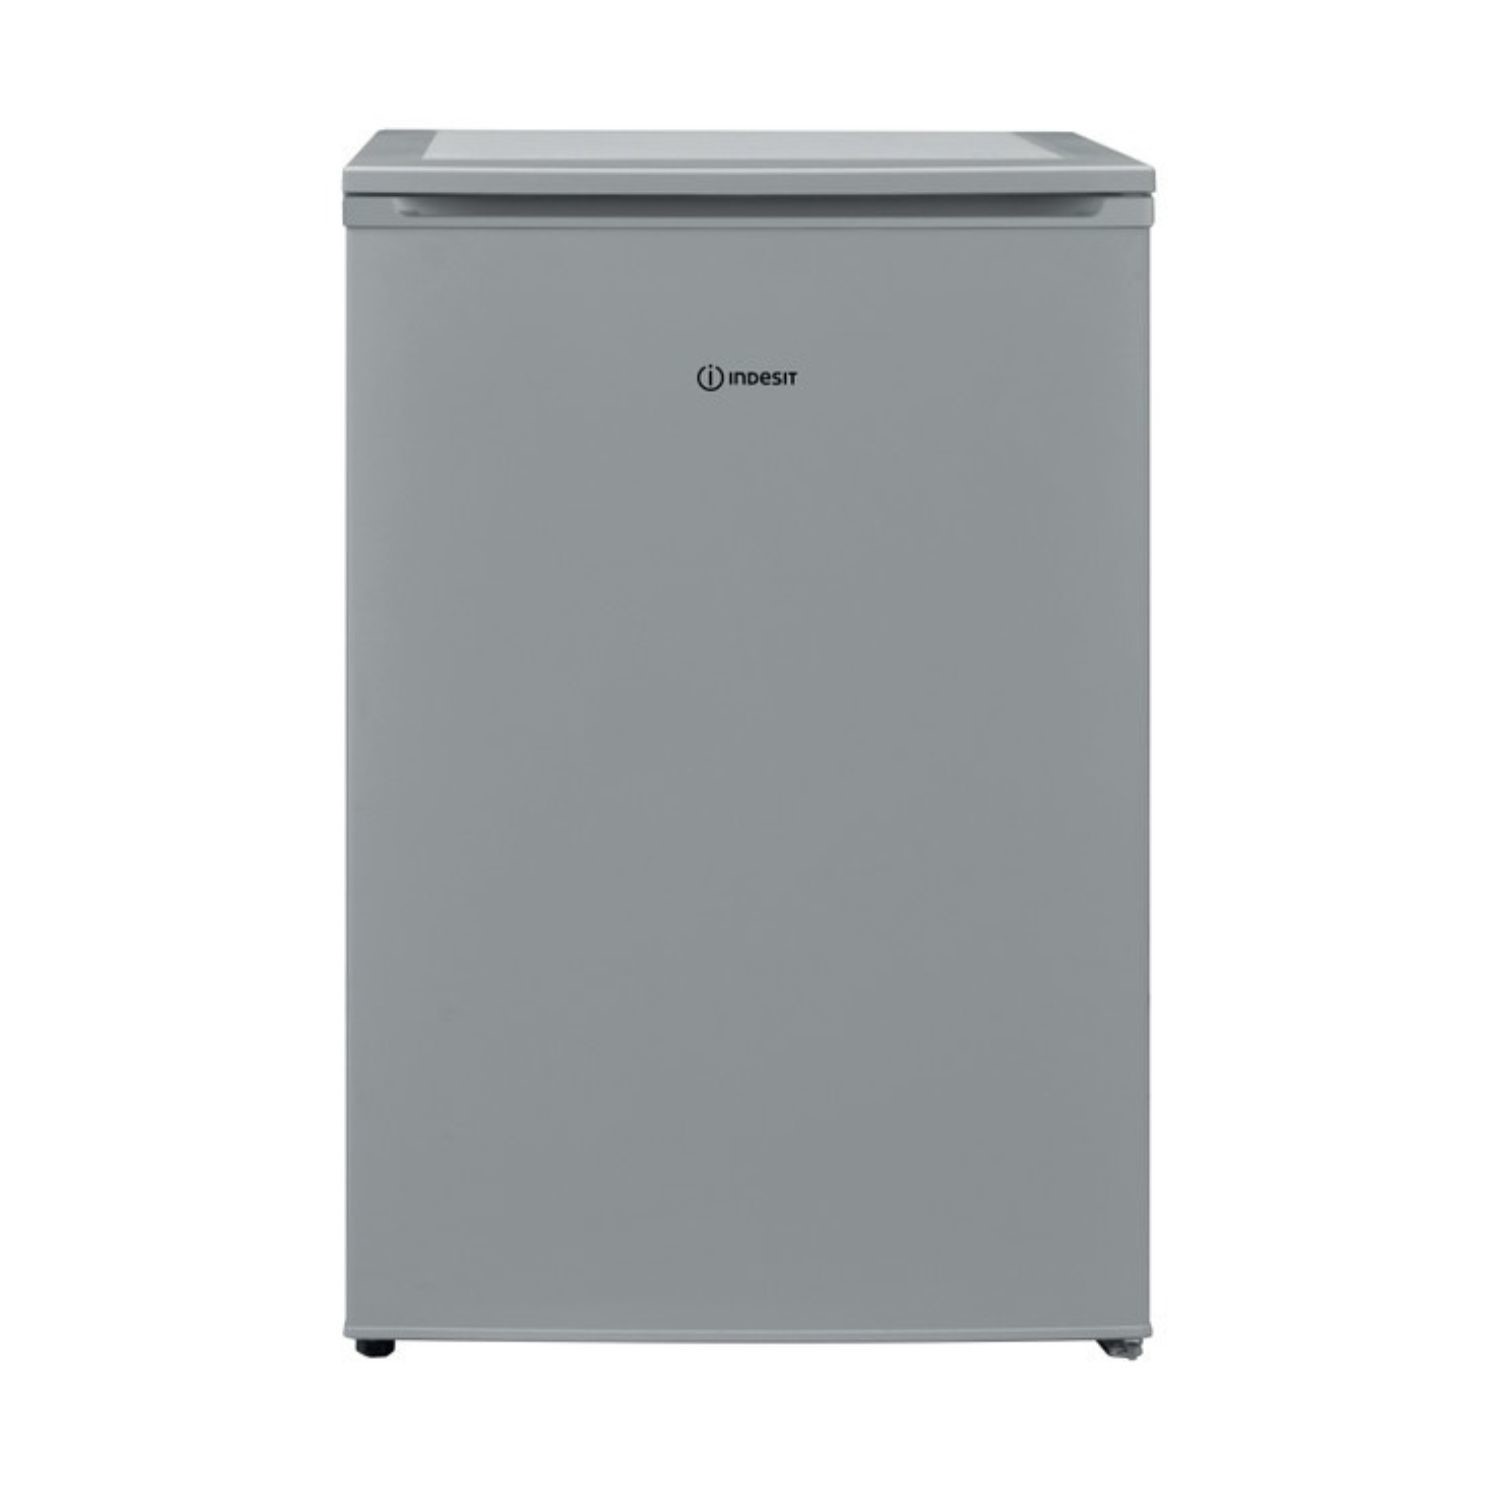 Photos - Other for Computer Indesit 135 Litre Freestanding Under Counter Fridge - Silver 869991675850 